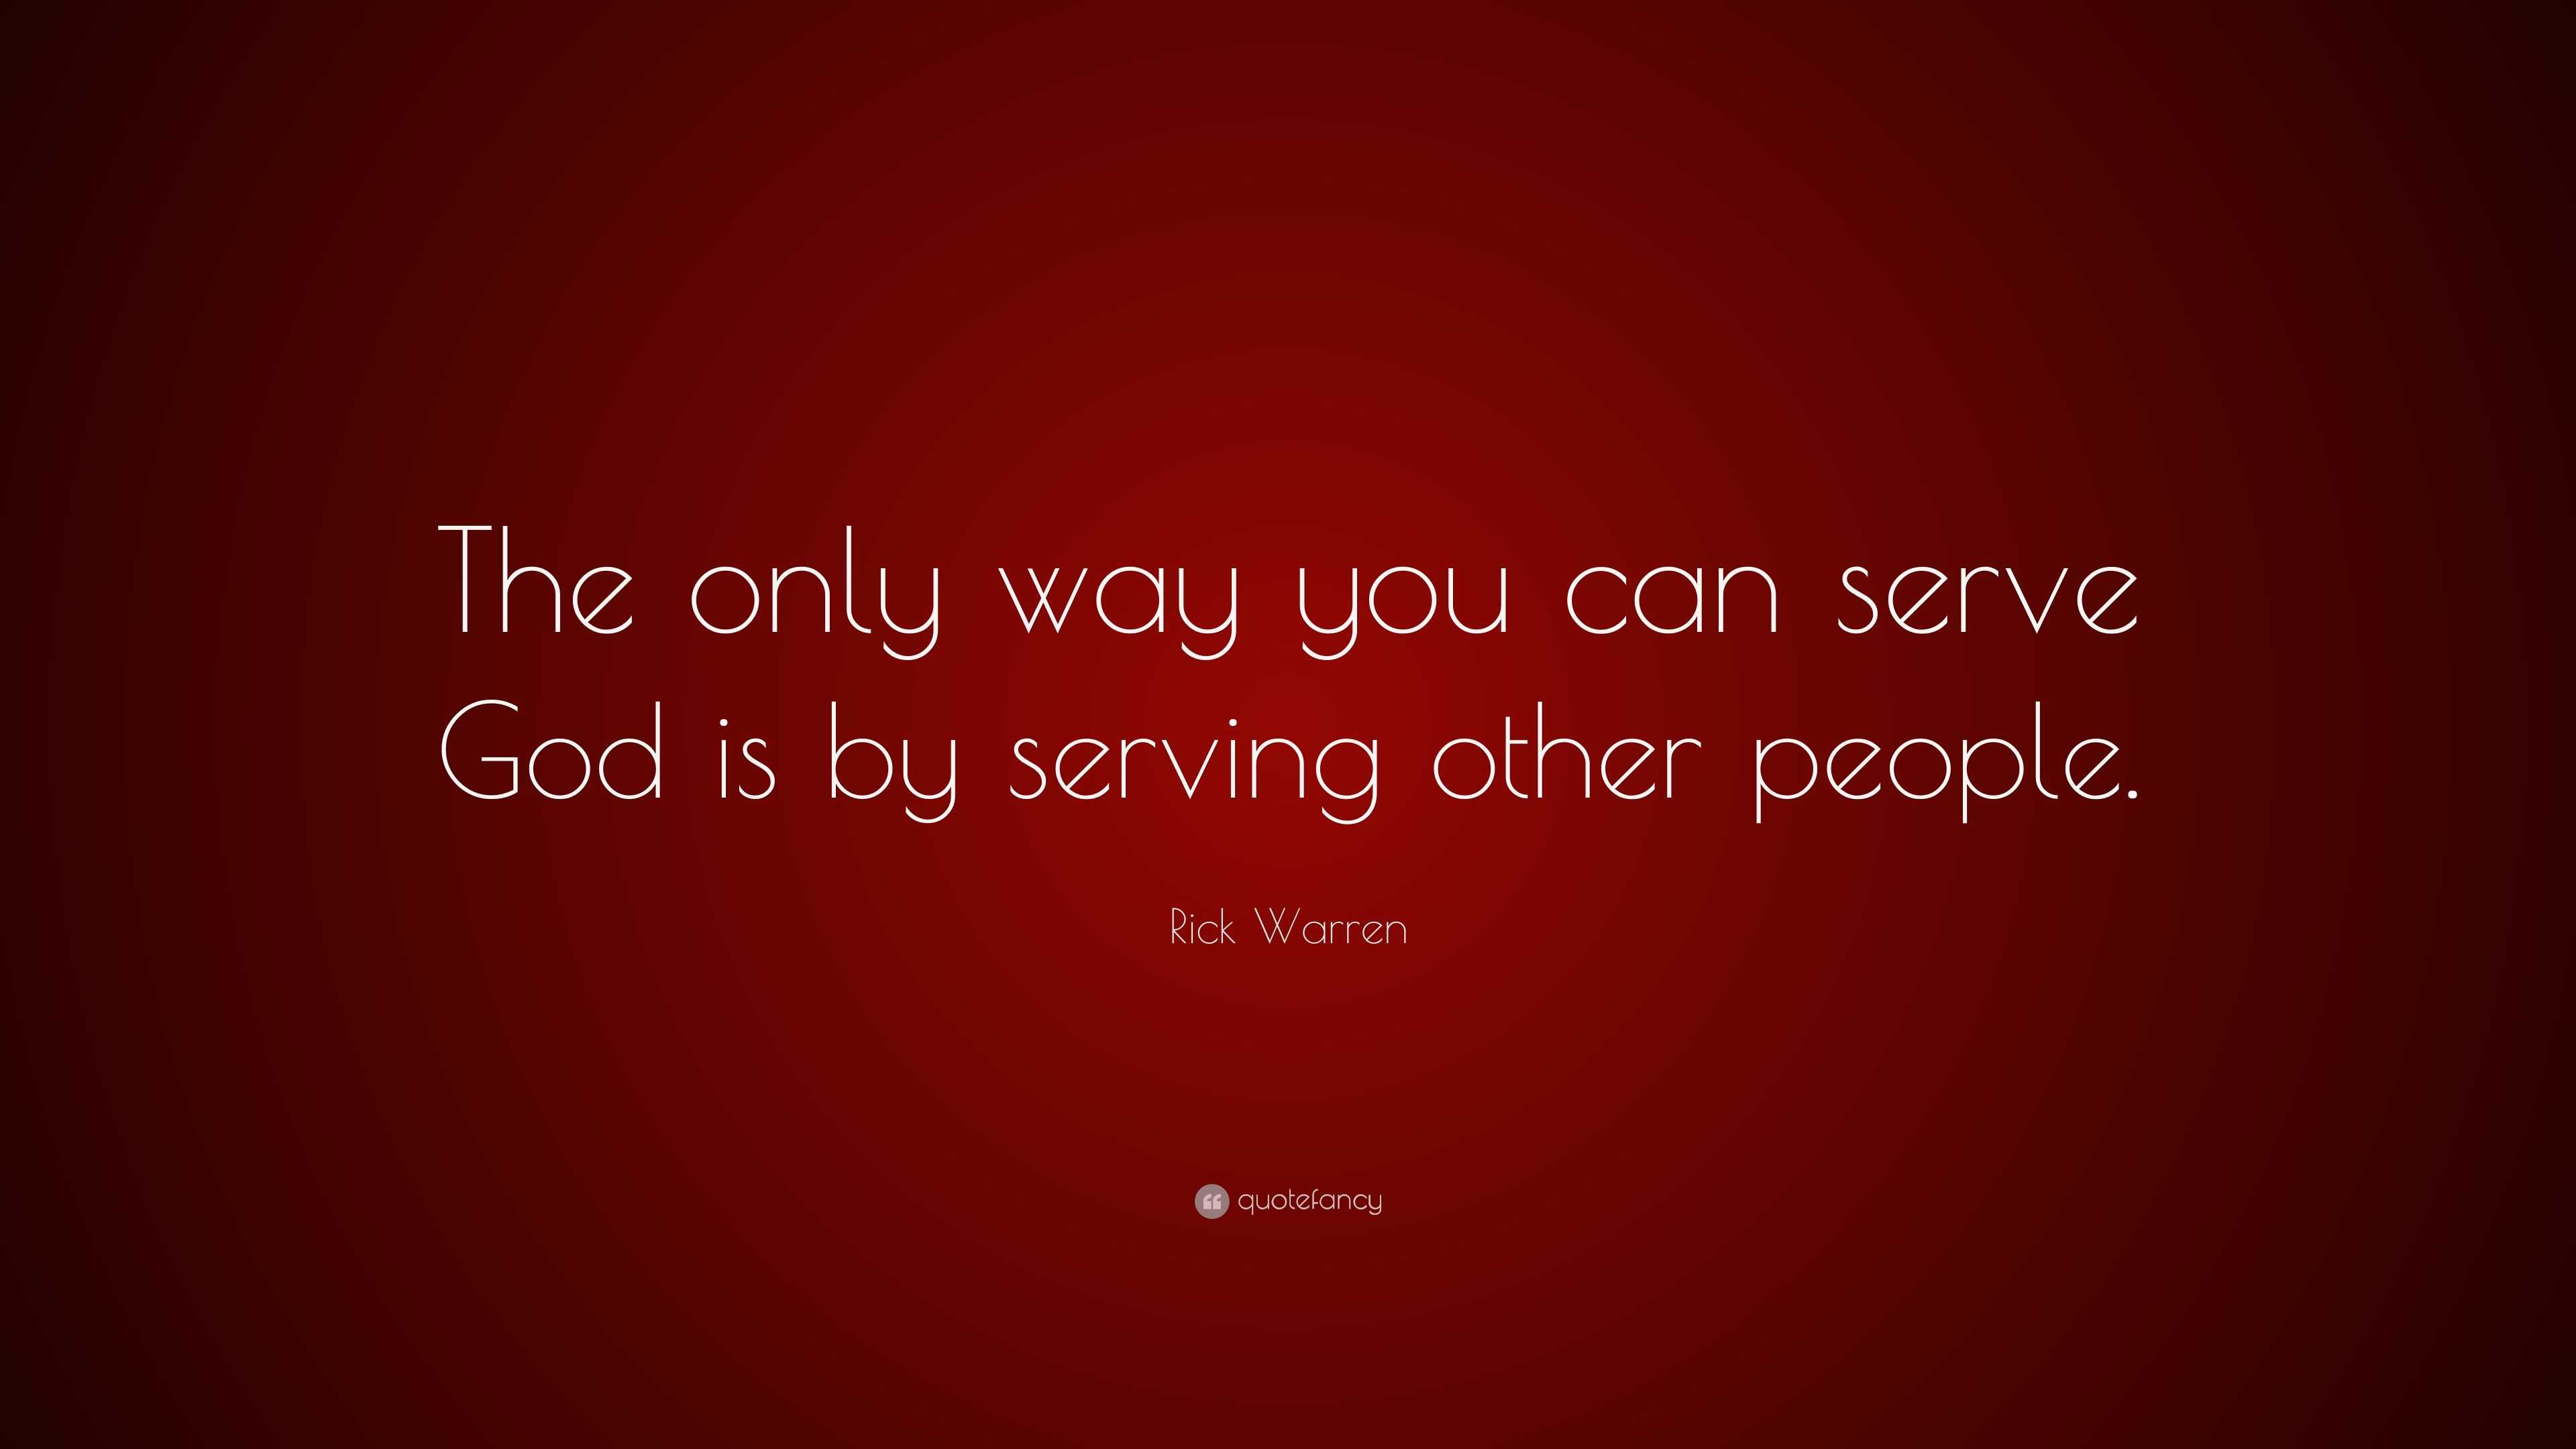 Rick Warren Quote: “The only way you can serve God is by serving other ...